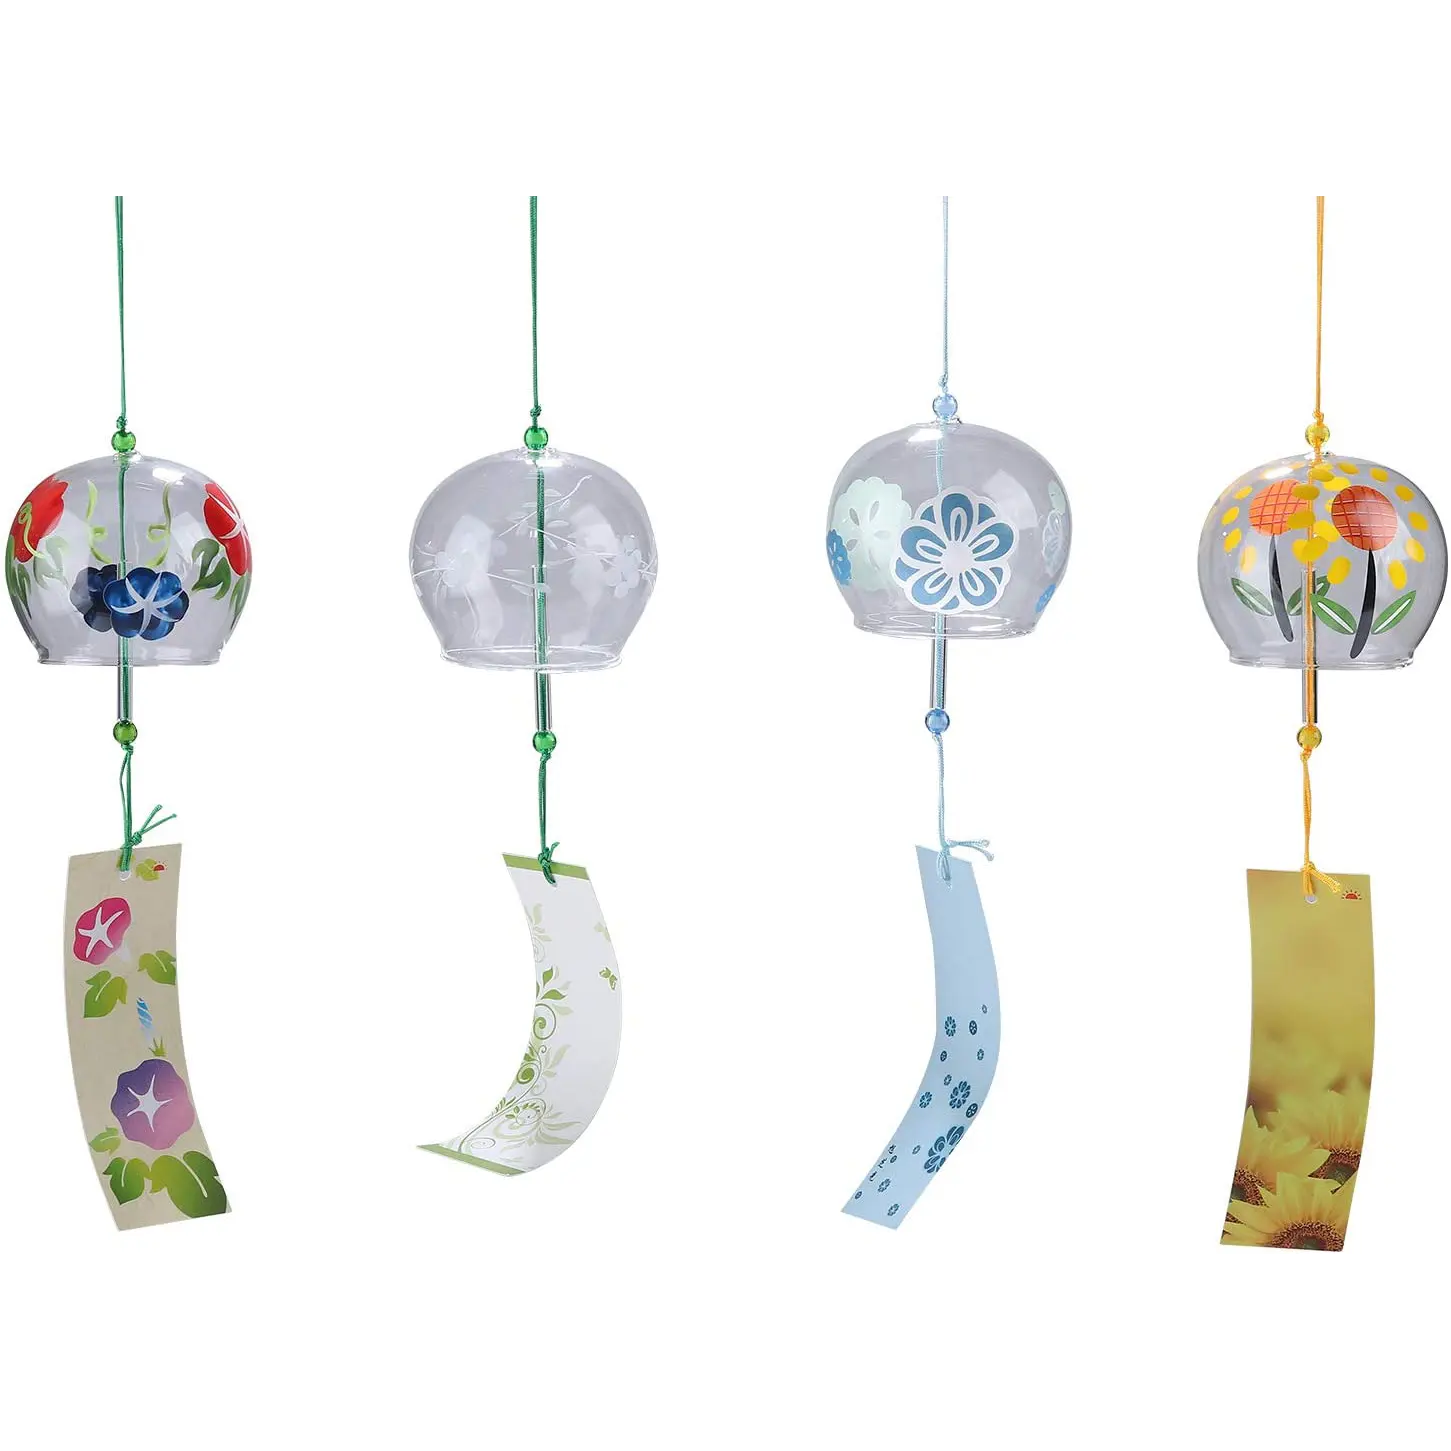 Japanese Wind Chimes Romantic Flower Small Wind Bells Handmade Glass Japanese Style Pendant for Birthday Gift Home Decors